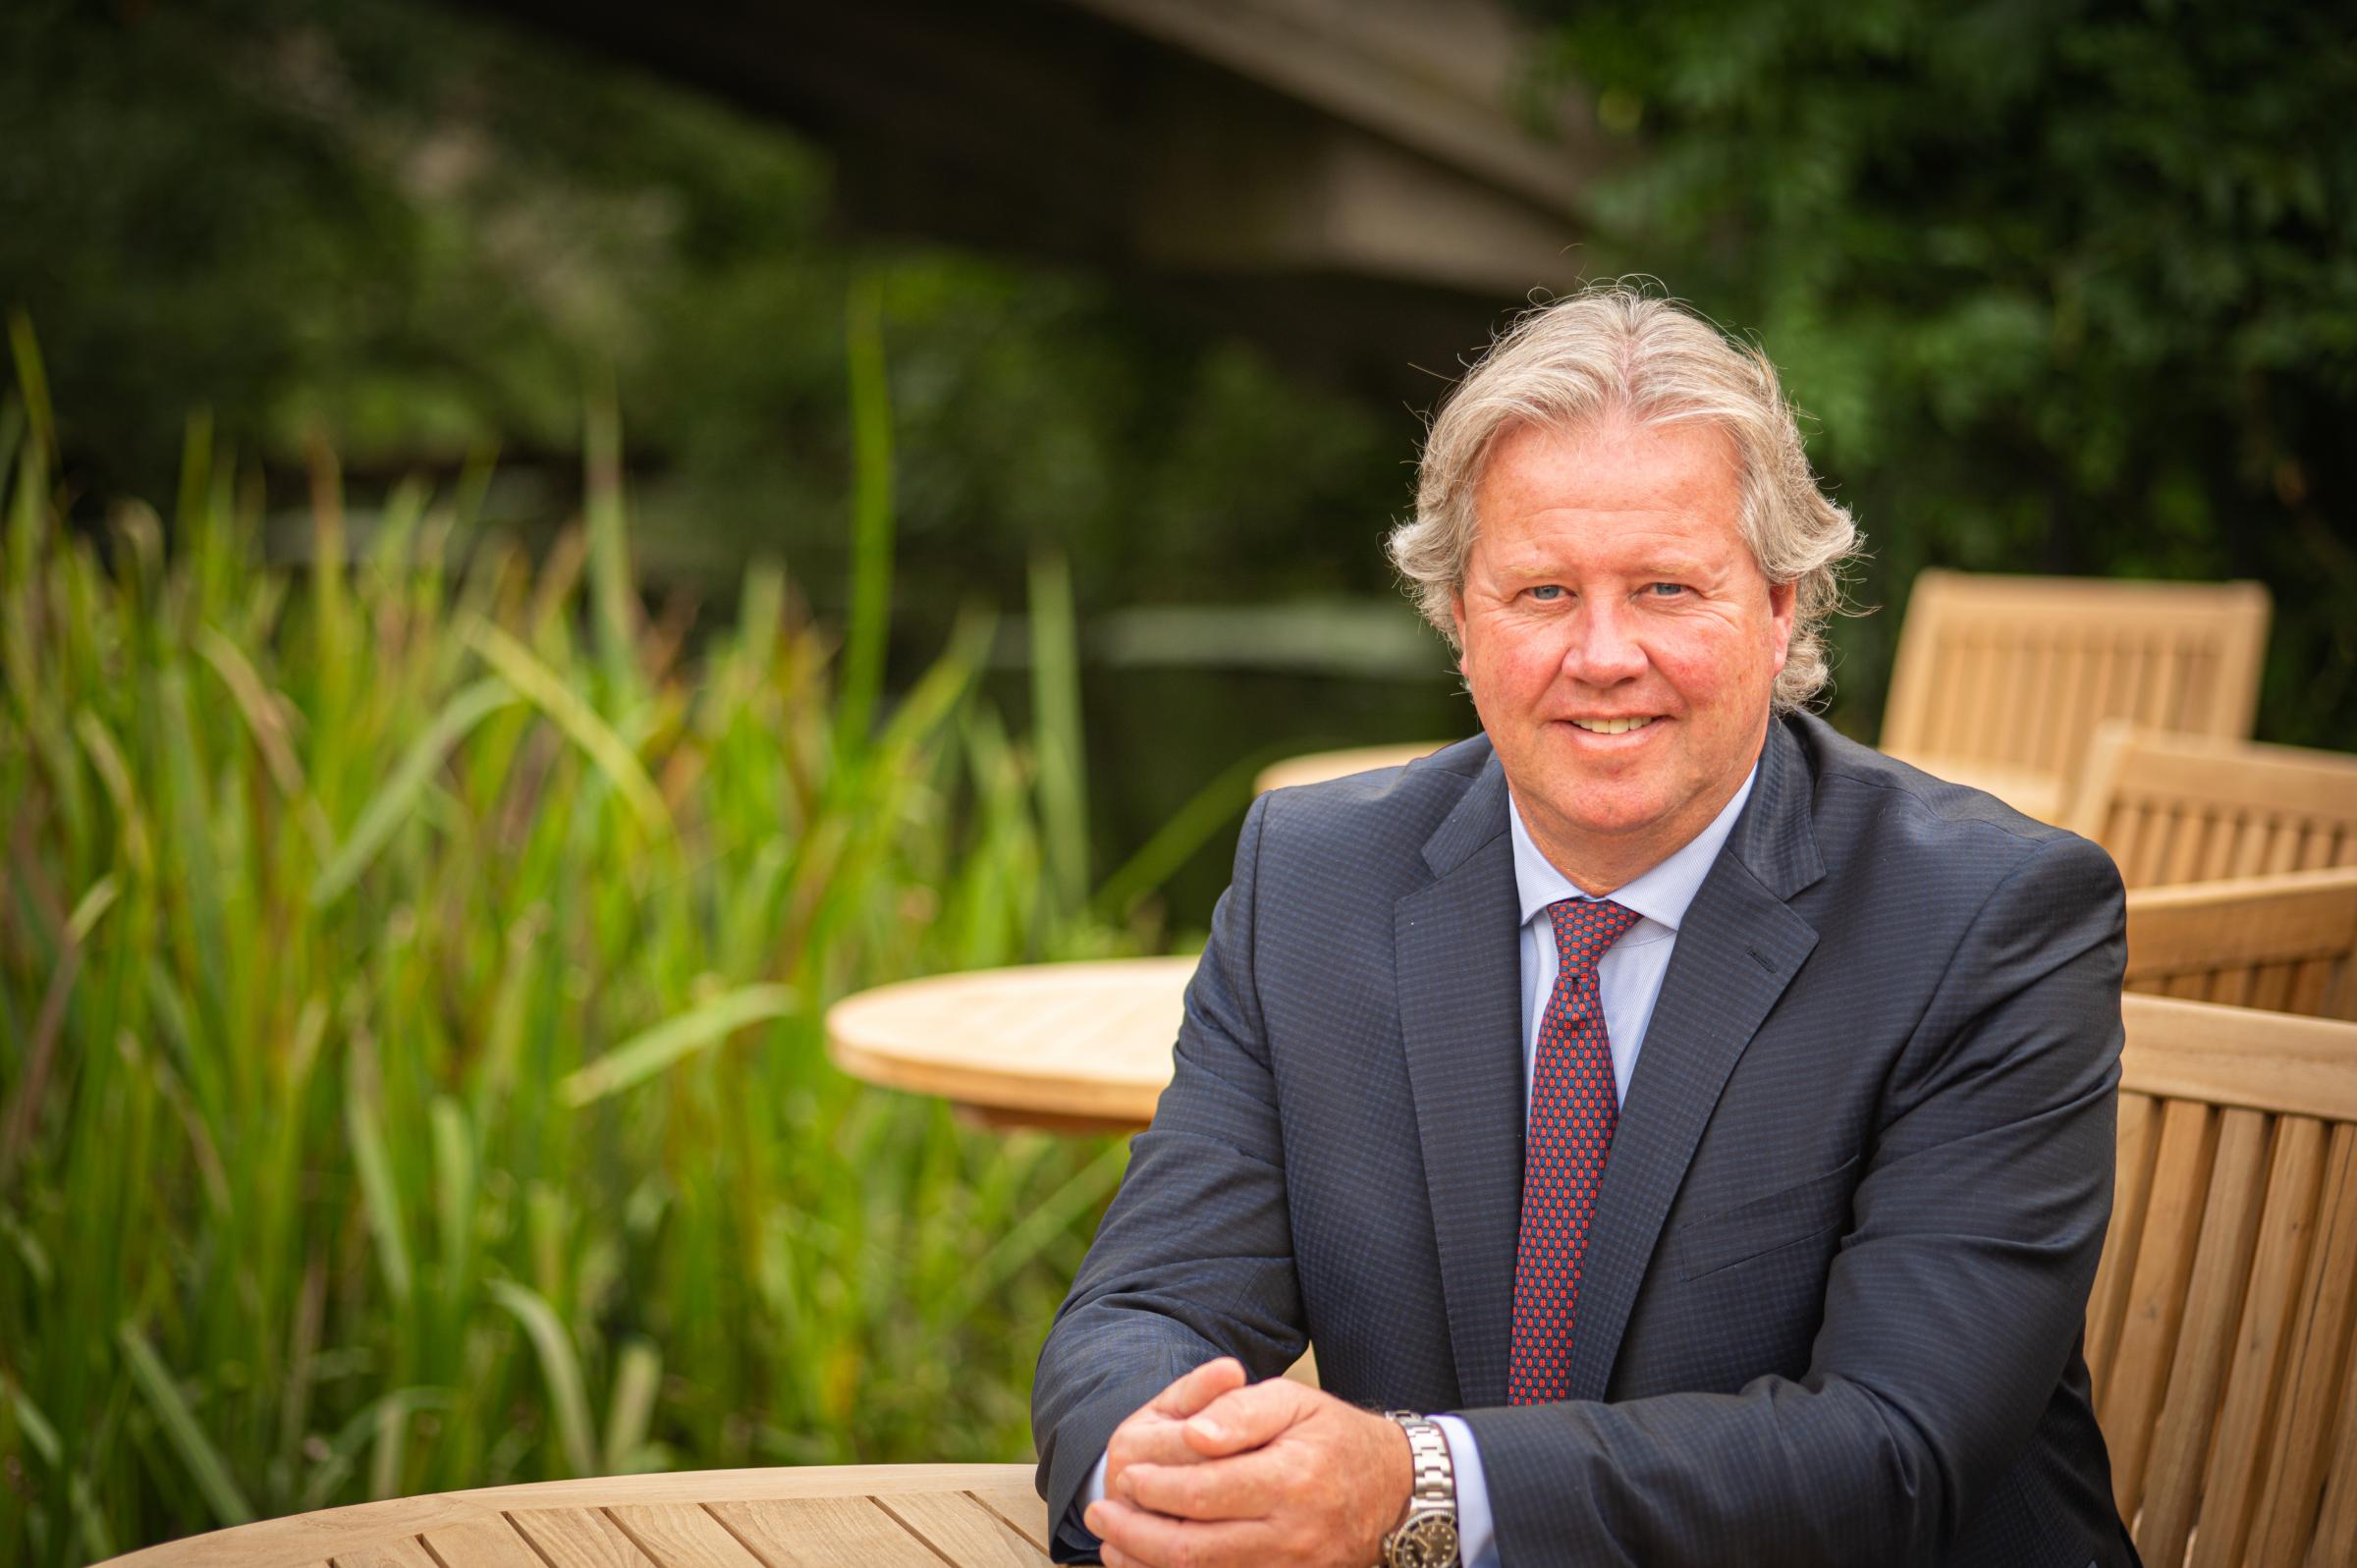 STRONG LEADER: Paul Milsom is a prominent hotelier in East Anglia who has recently become life president of Pride of Britain Hotels 